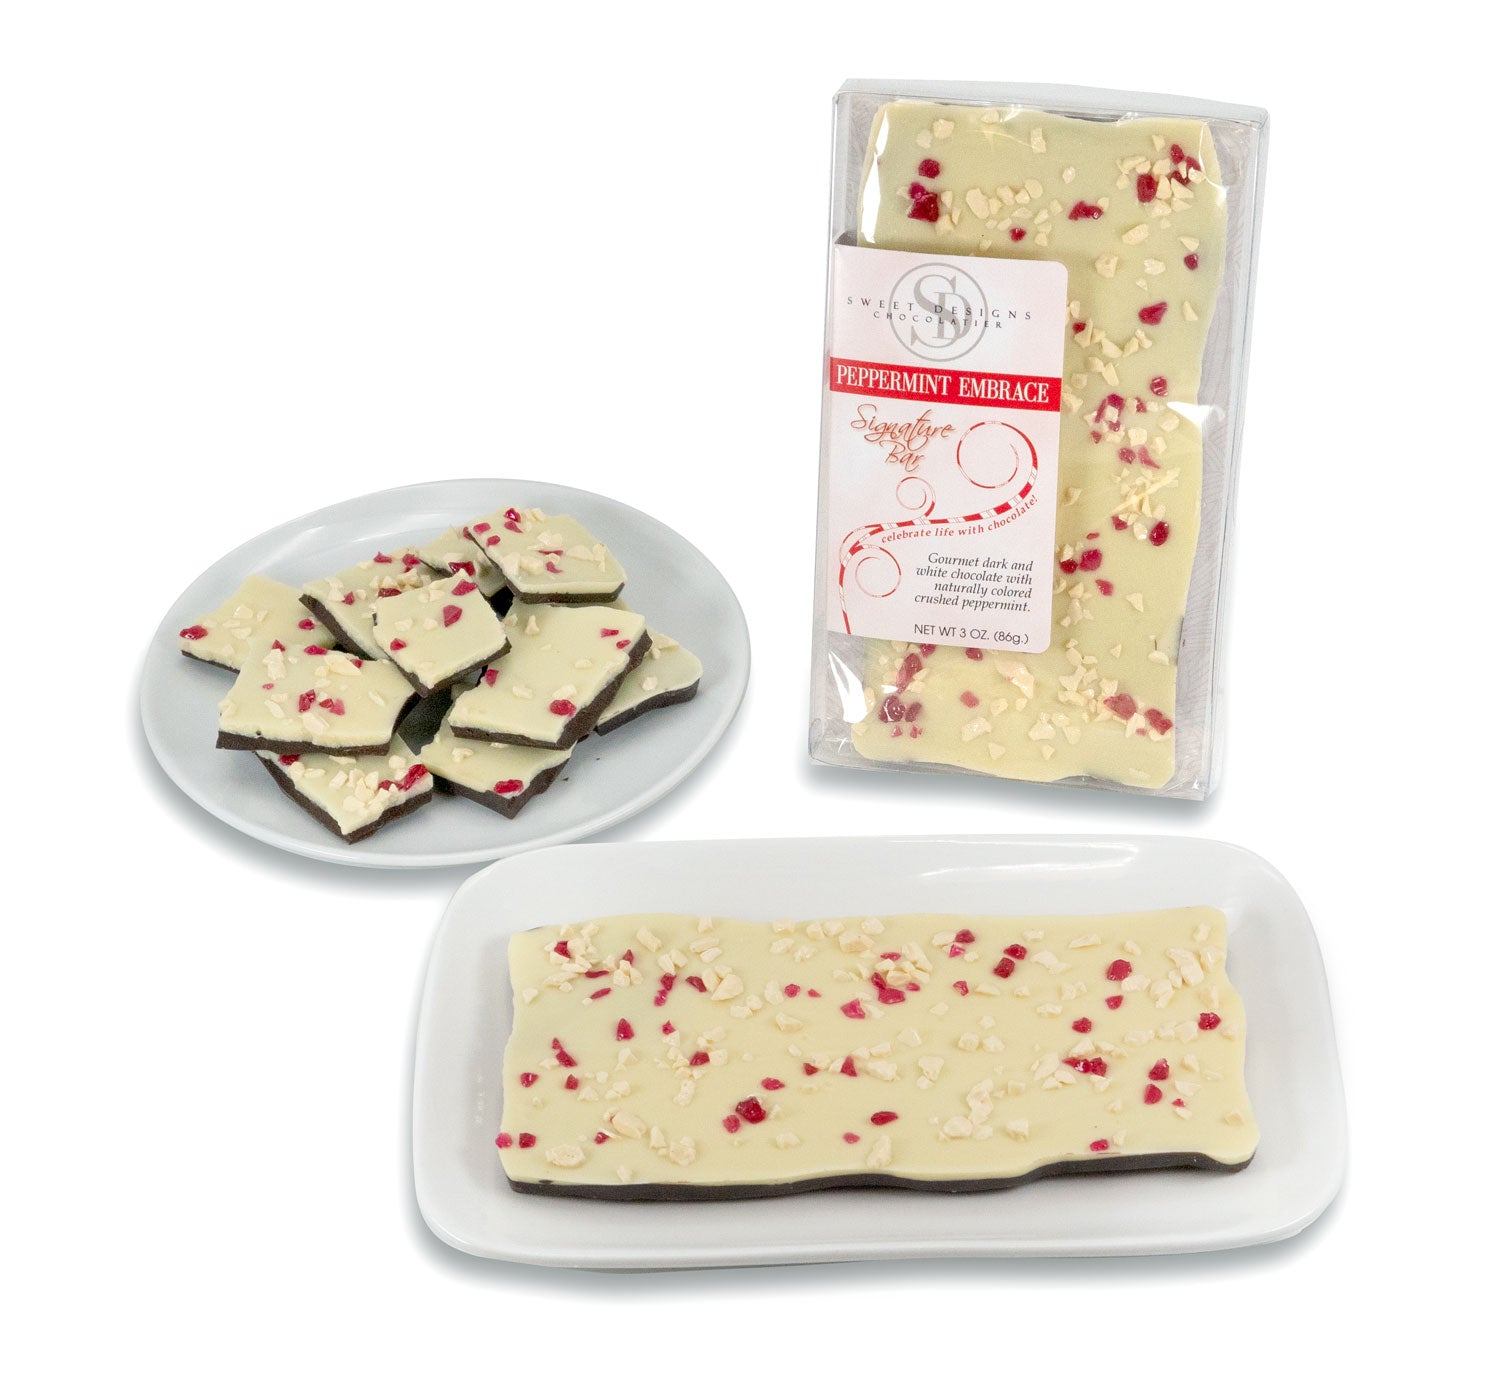 A white and dark chocolate bar sprinkled with crunchy peppermint pieces